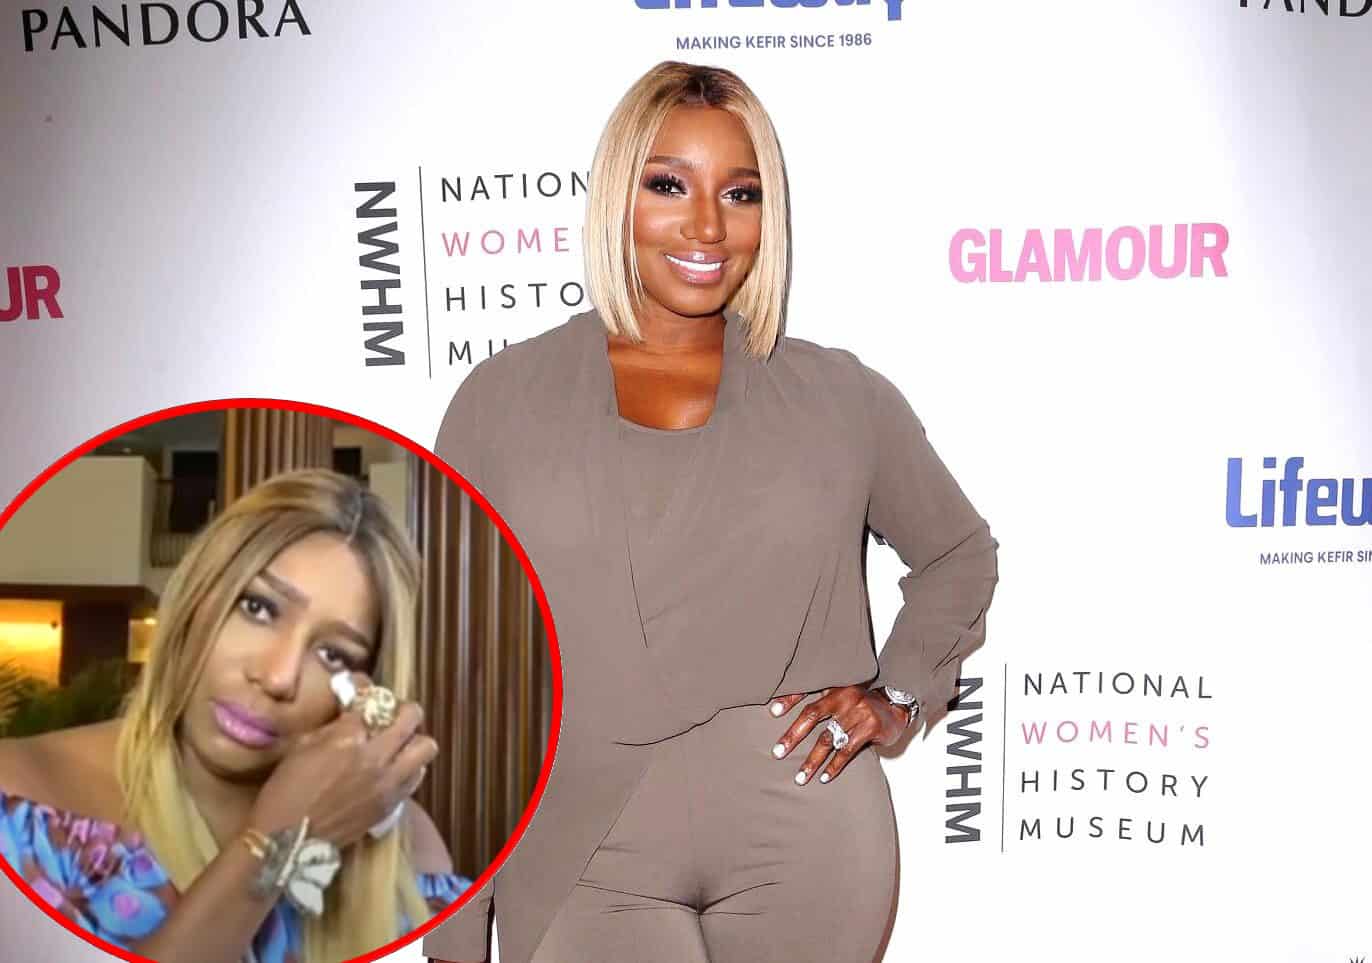 VIDEO: Nene Leakes Cries About Her RHOA Exit in New Interview Clip, Accuses Bravo of 'Bullying' and 'Discrimination'